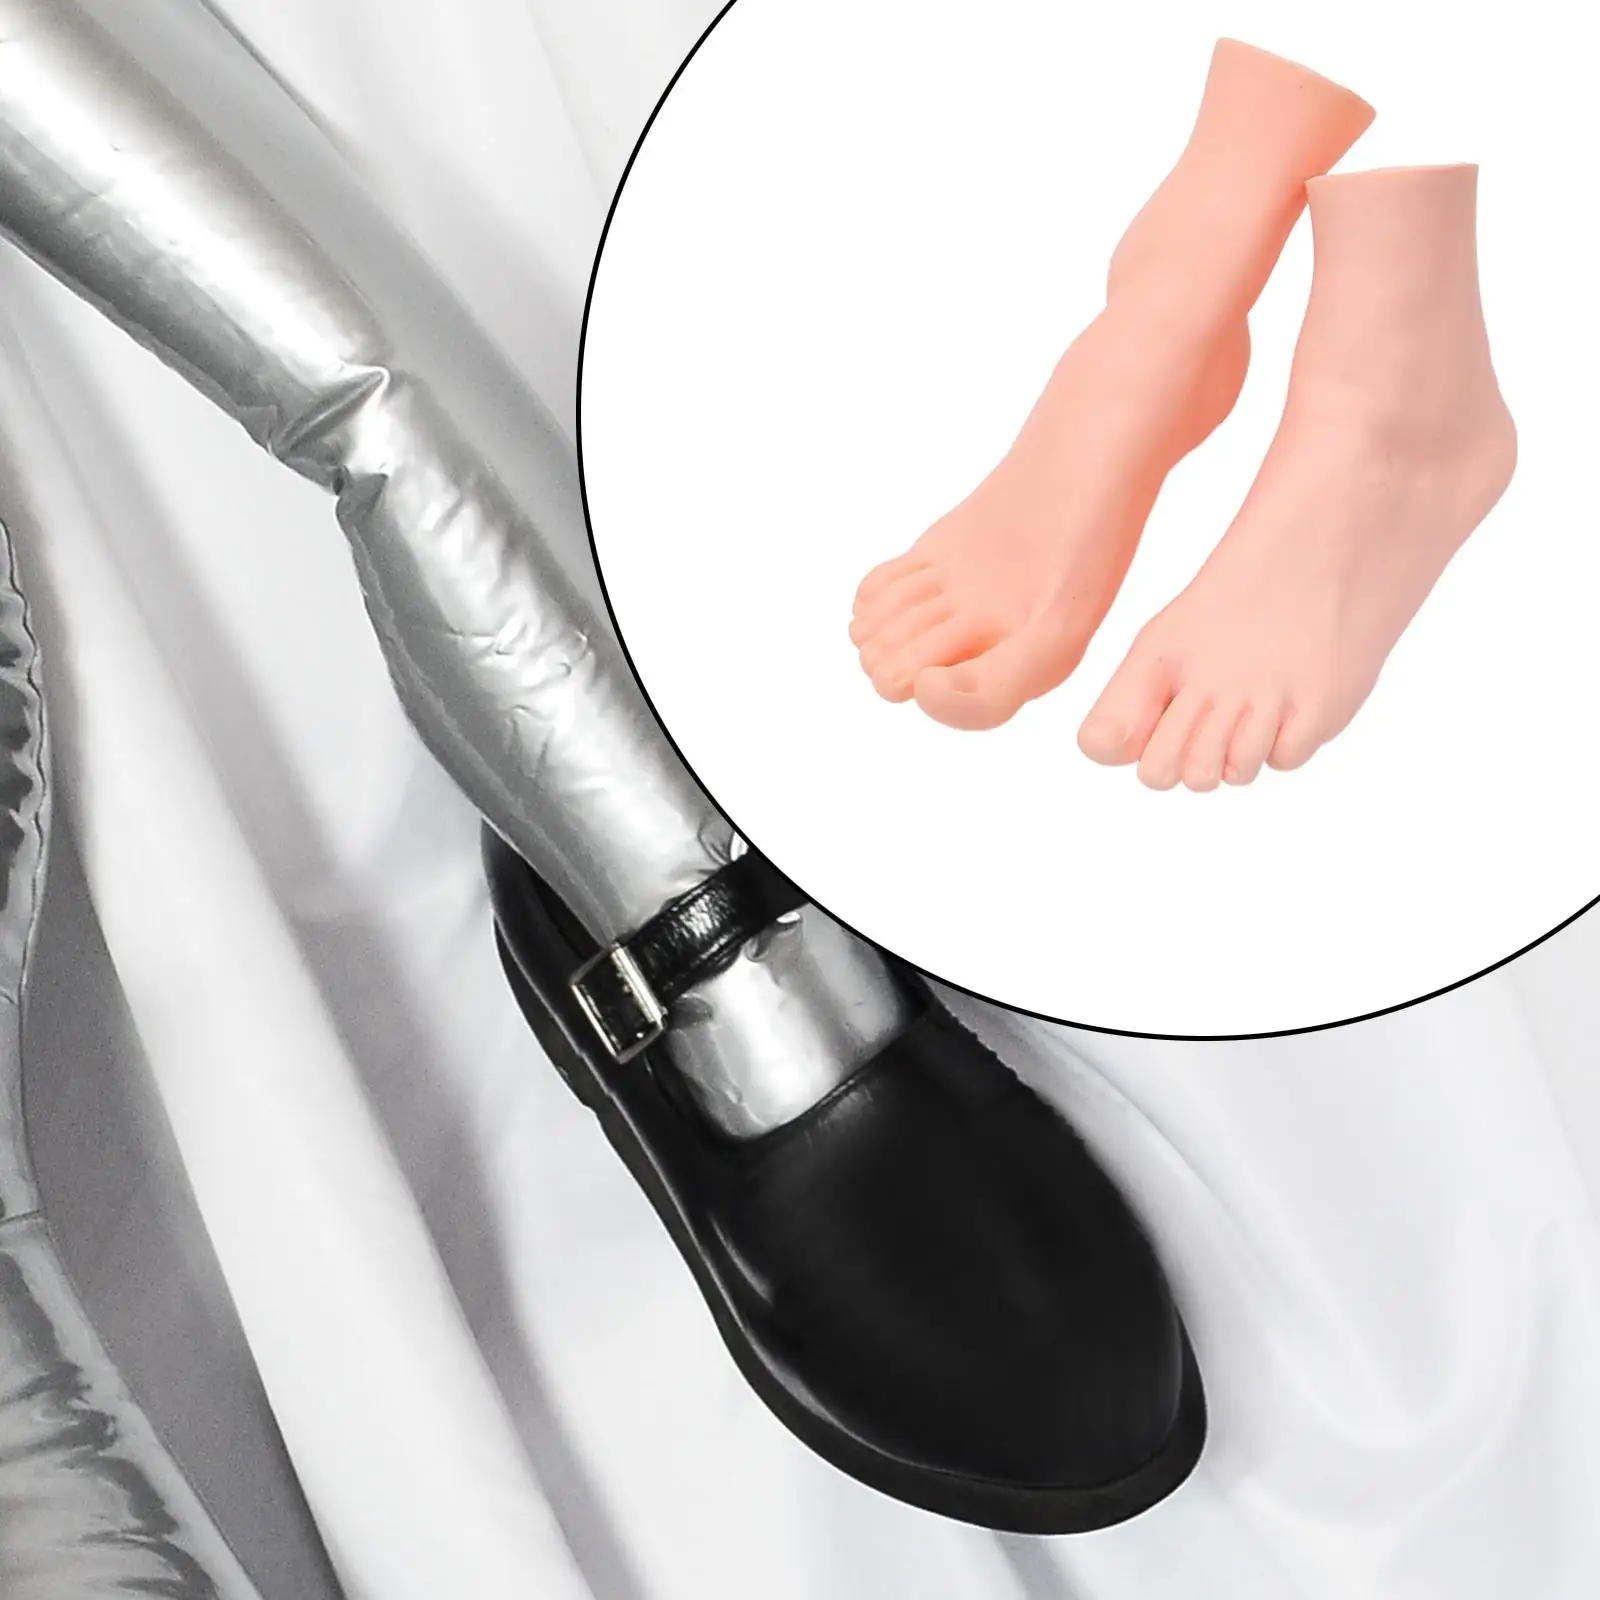 Soft Lifesize Female Mannequin Foot Fake Manicure Movie Props Jewerly Sandal Shoe Sock Display Art Sketch Nail Shoes Display